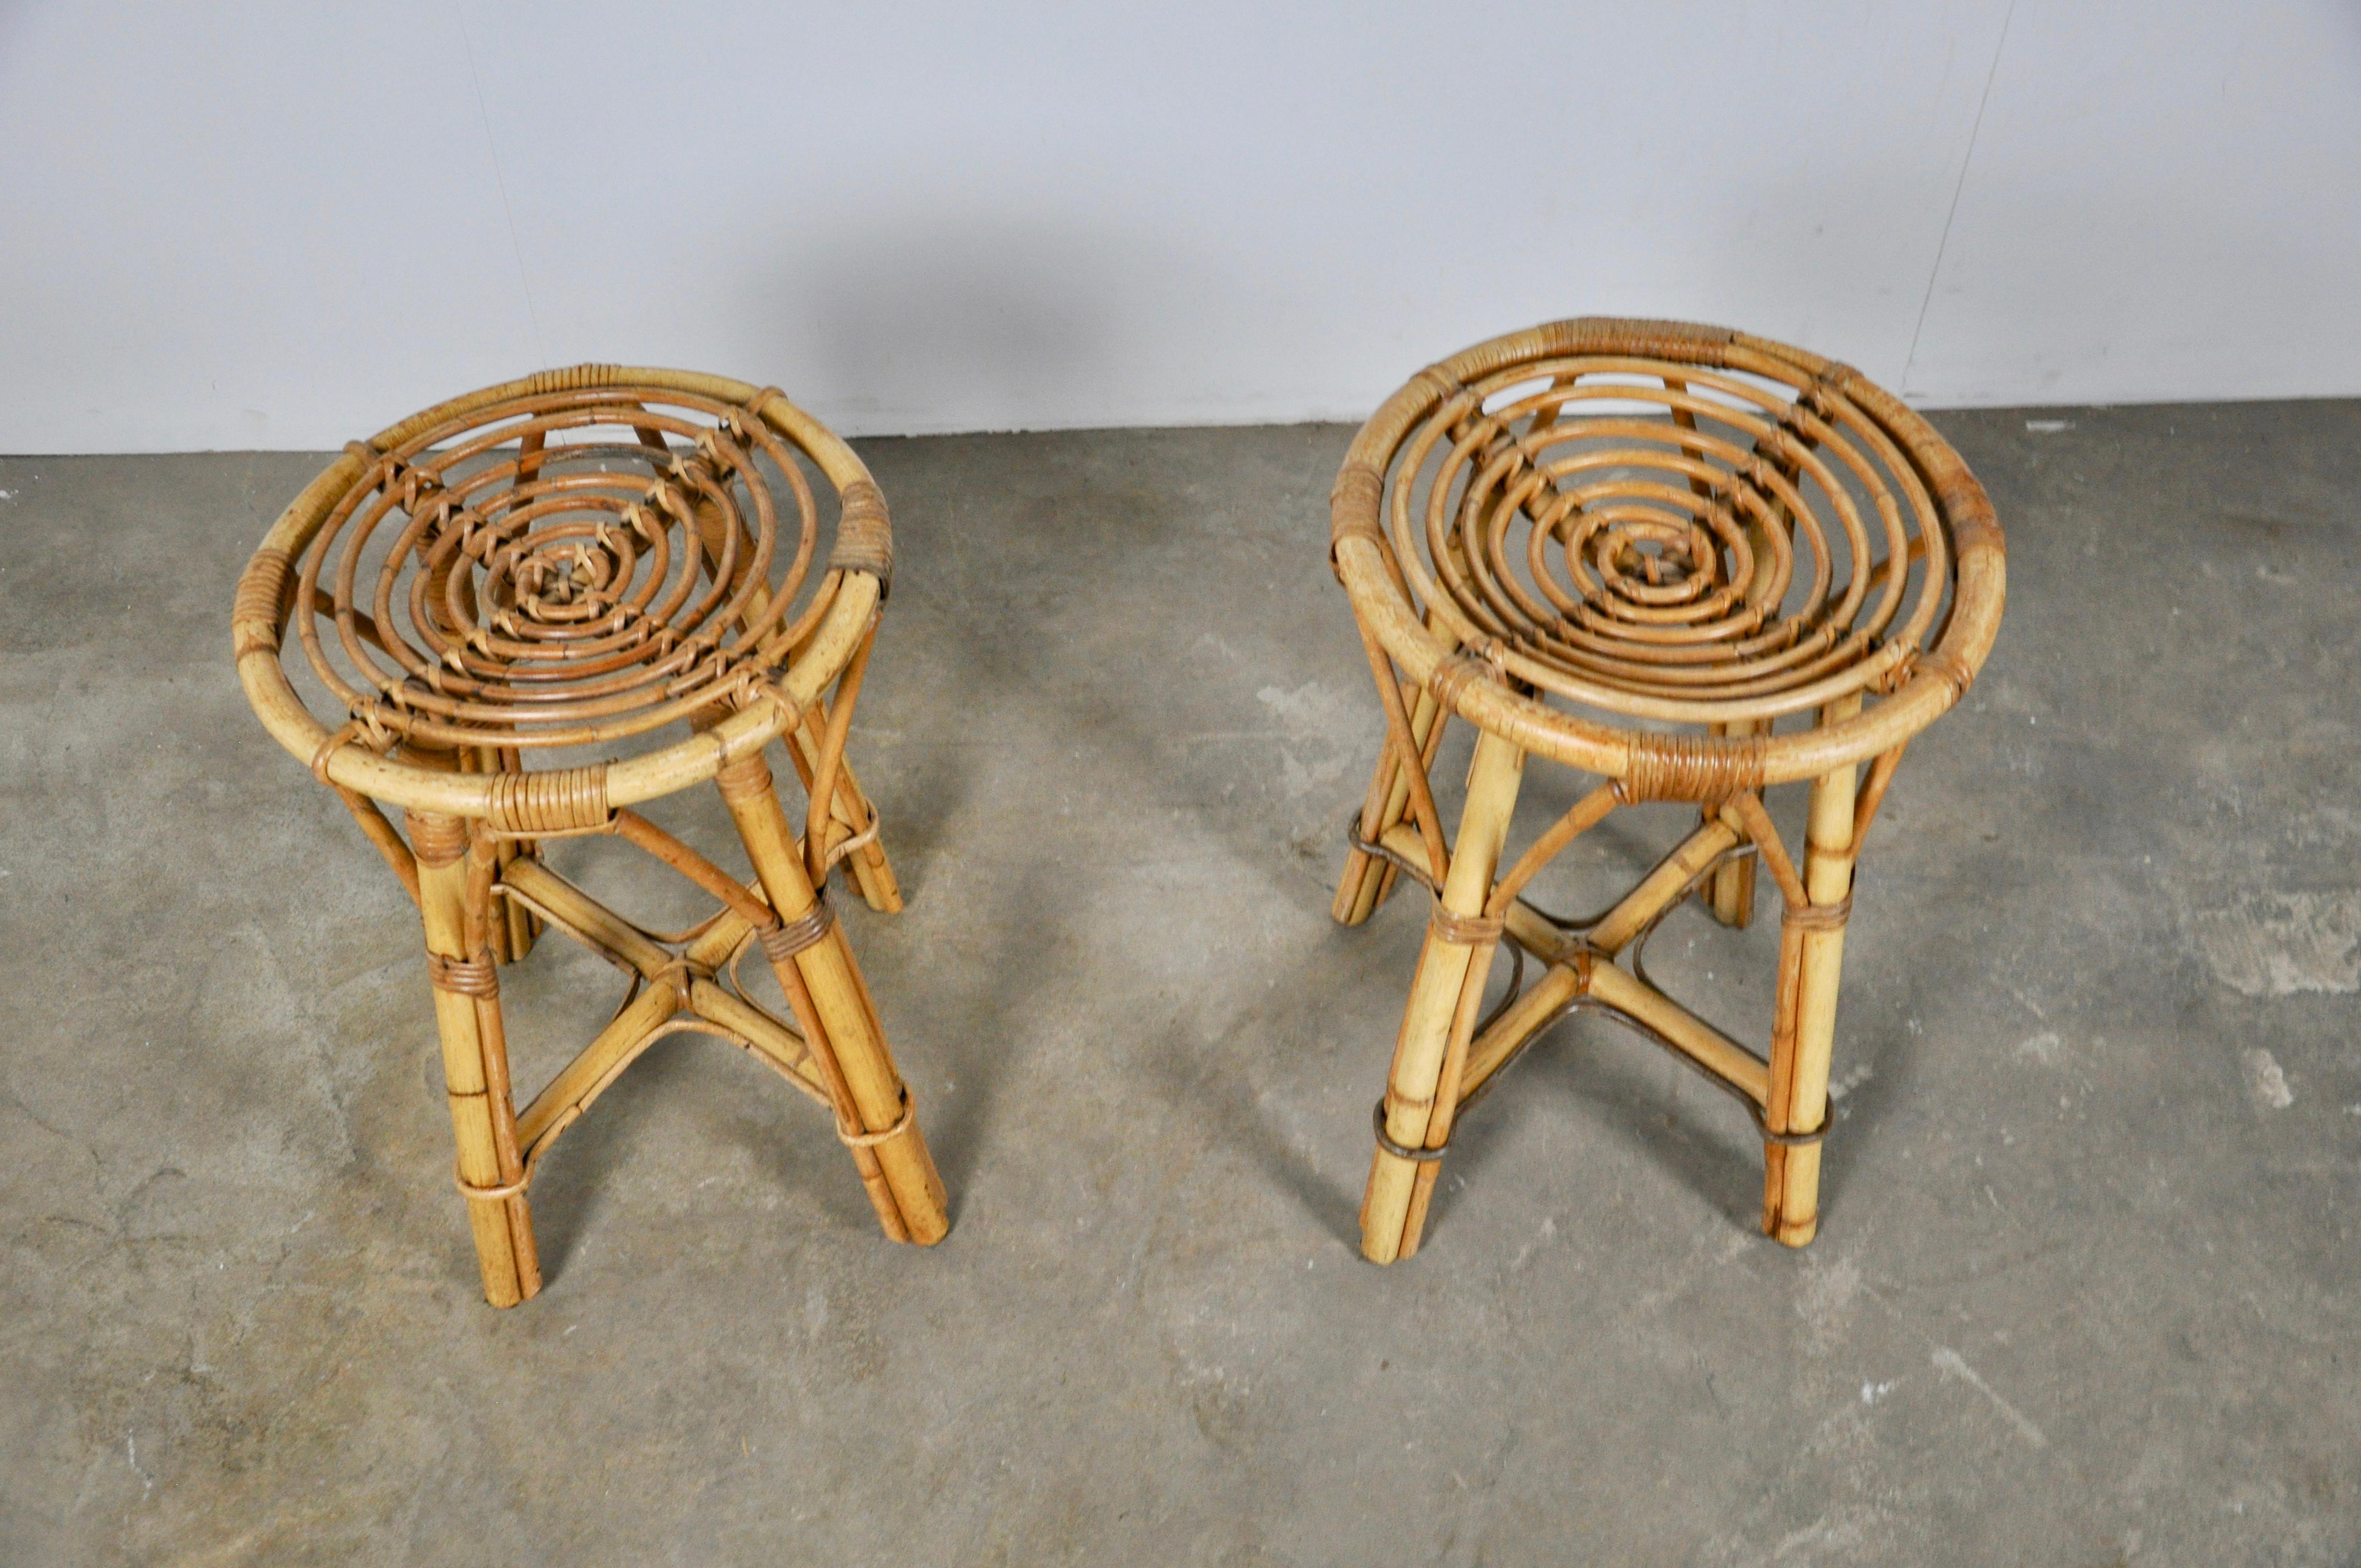 Set of two rattan stools from the 1960s.